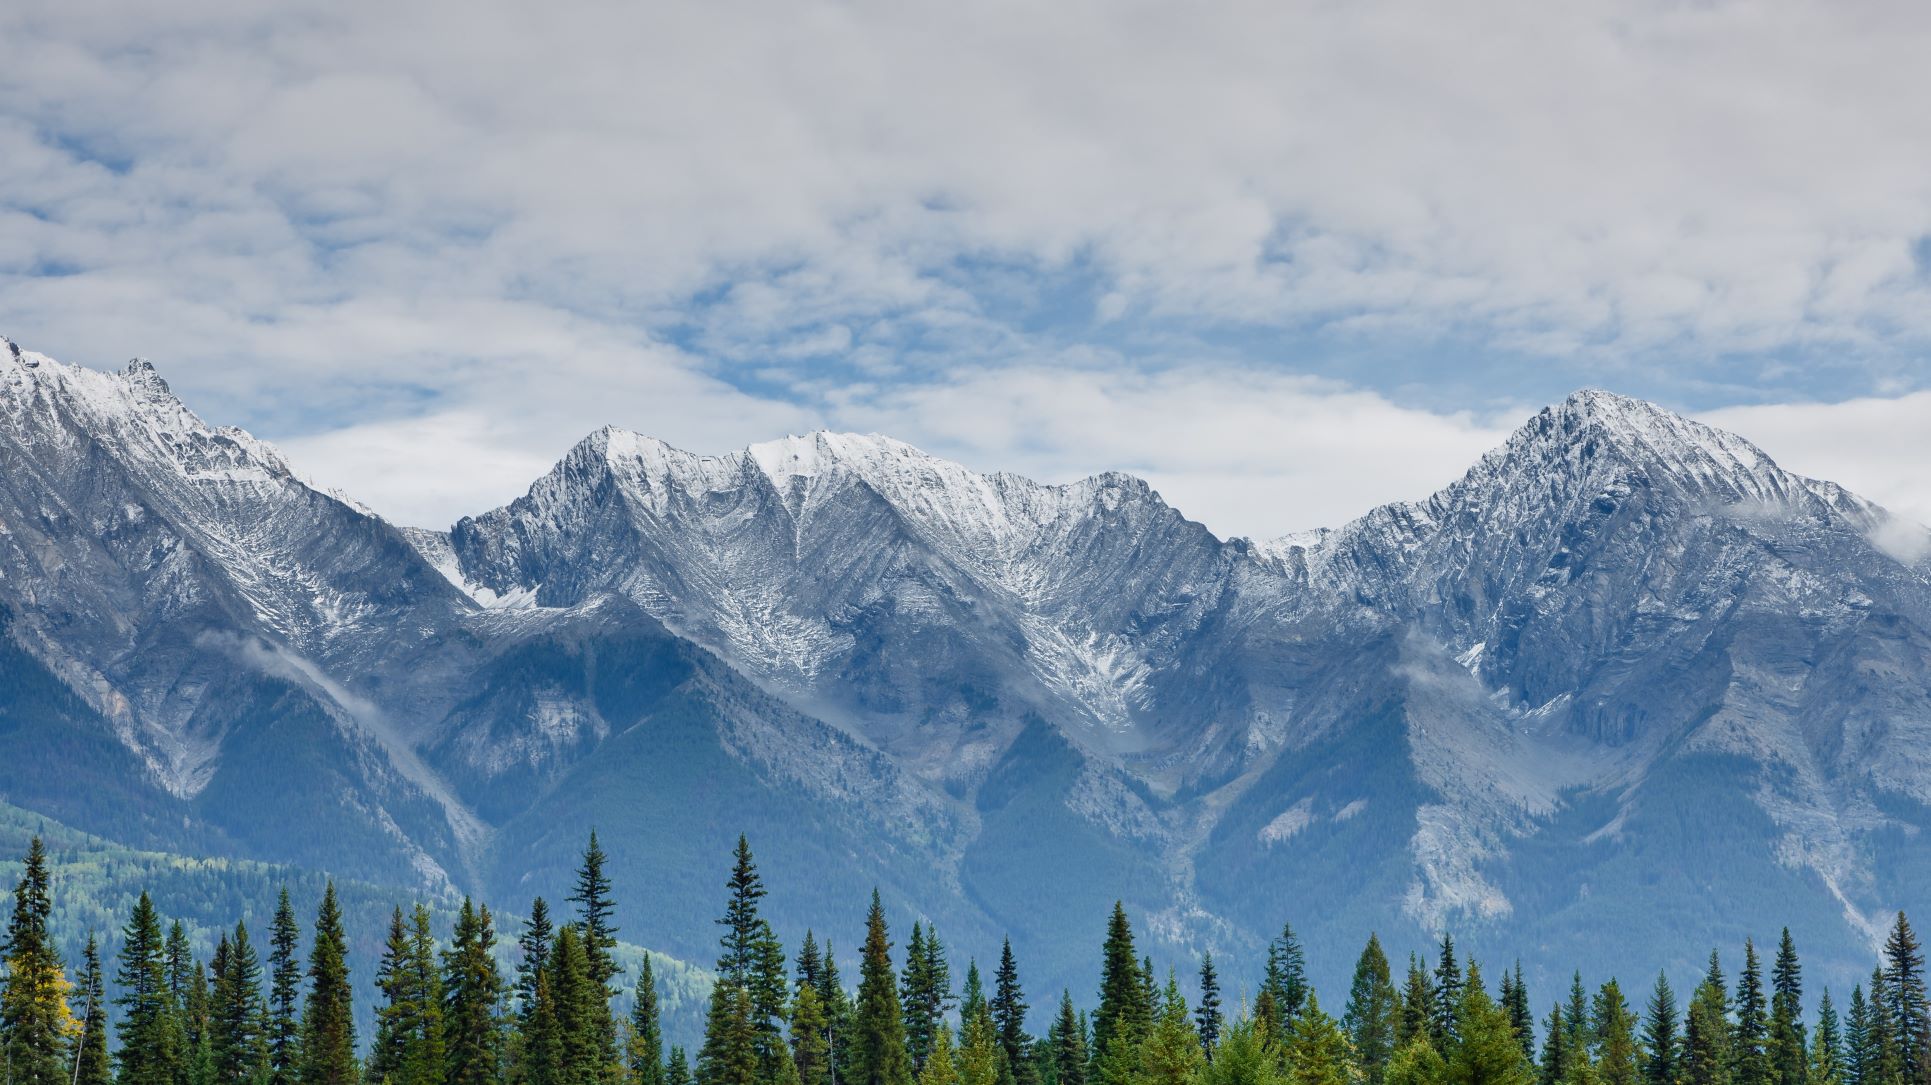 BC’s changing regulatory landscape: BC and Treaty 8 First Nations negotiate collaborative approach to address cumulative effects of resource development | Canada | Global law firm